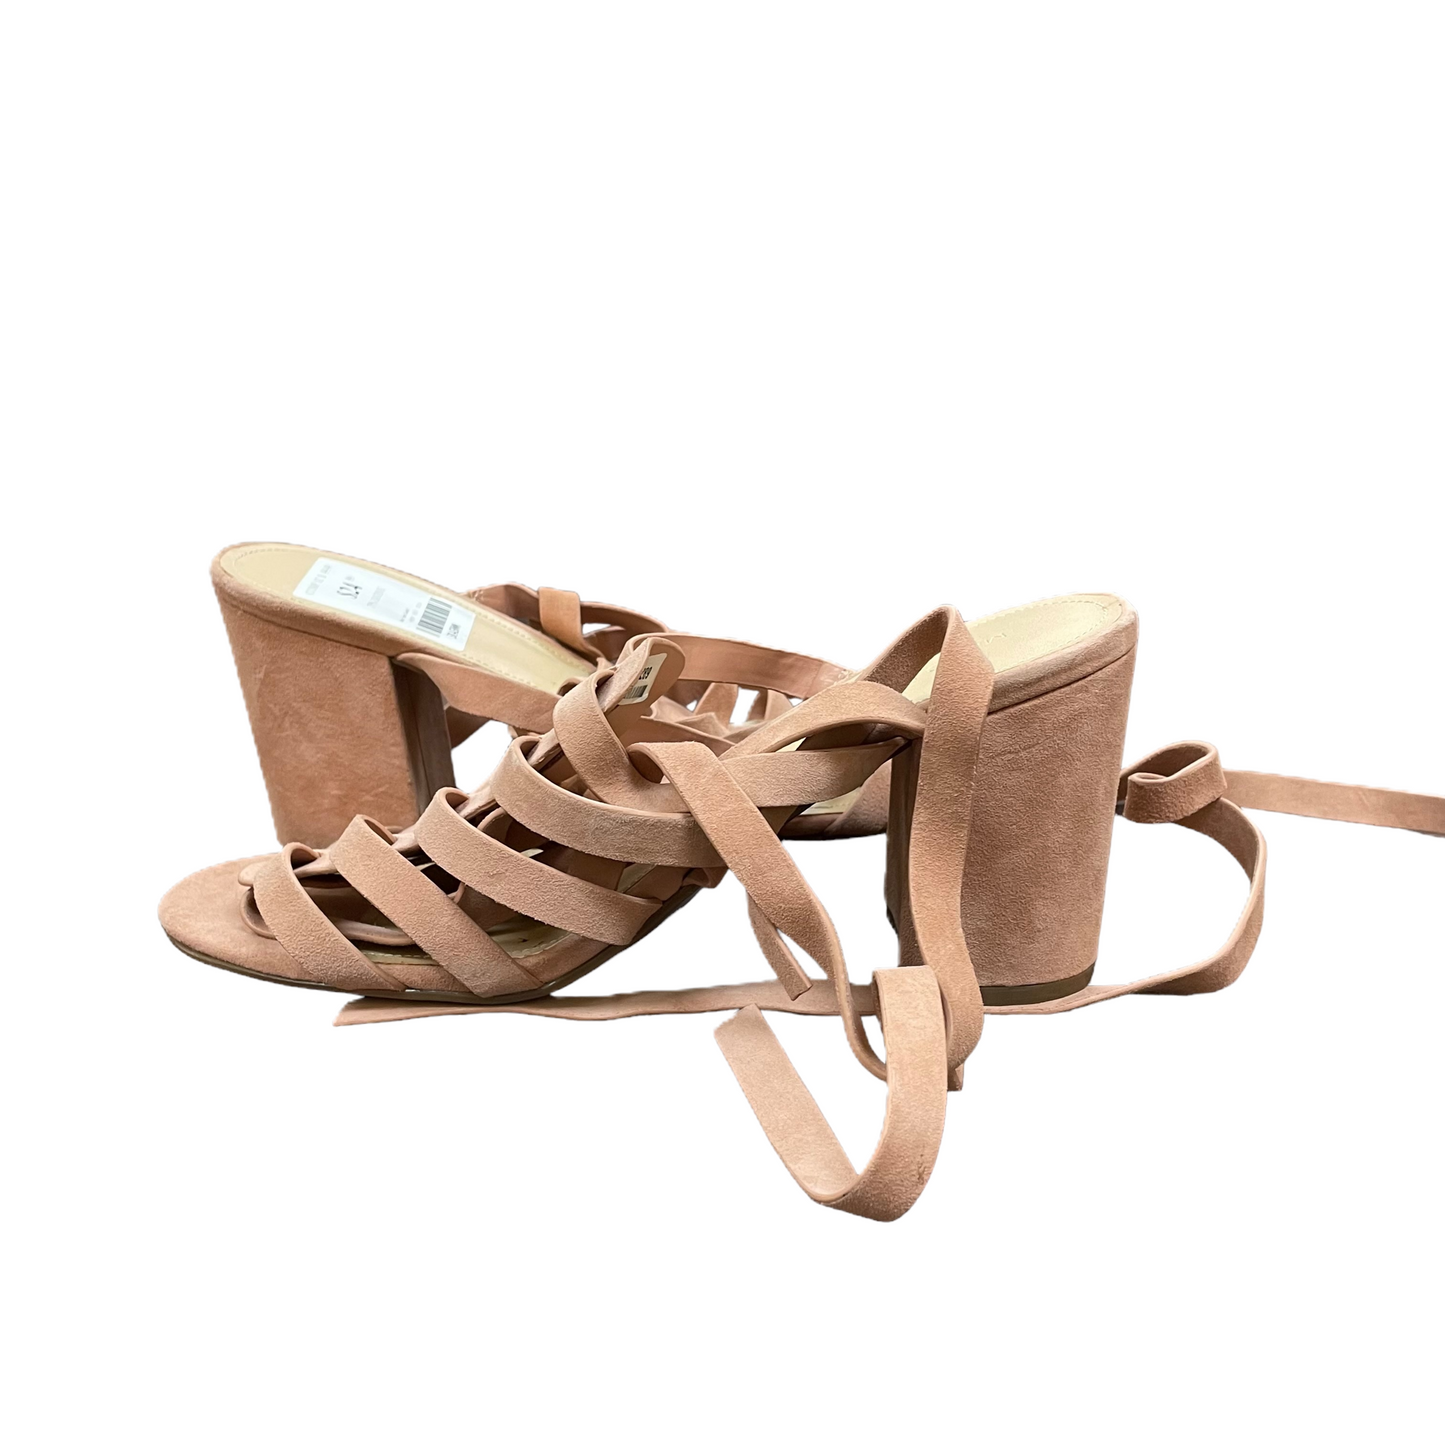 Peach Sandals Heels Block By Marc Fisher, Size: 11